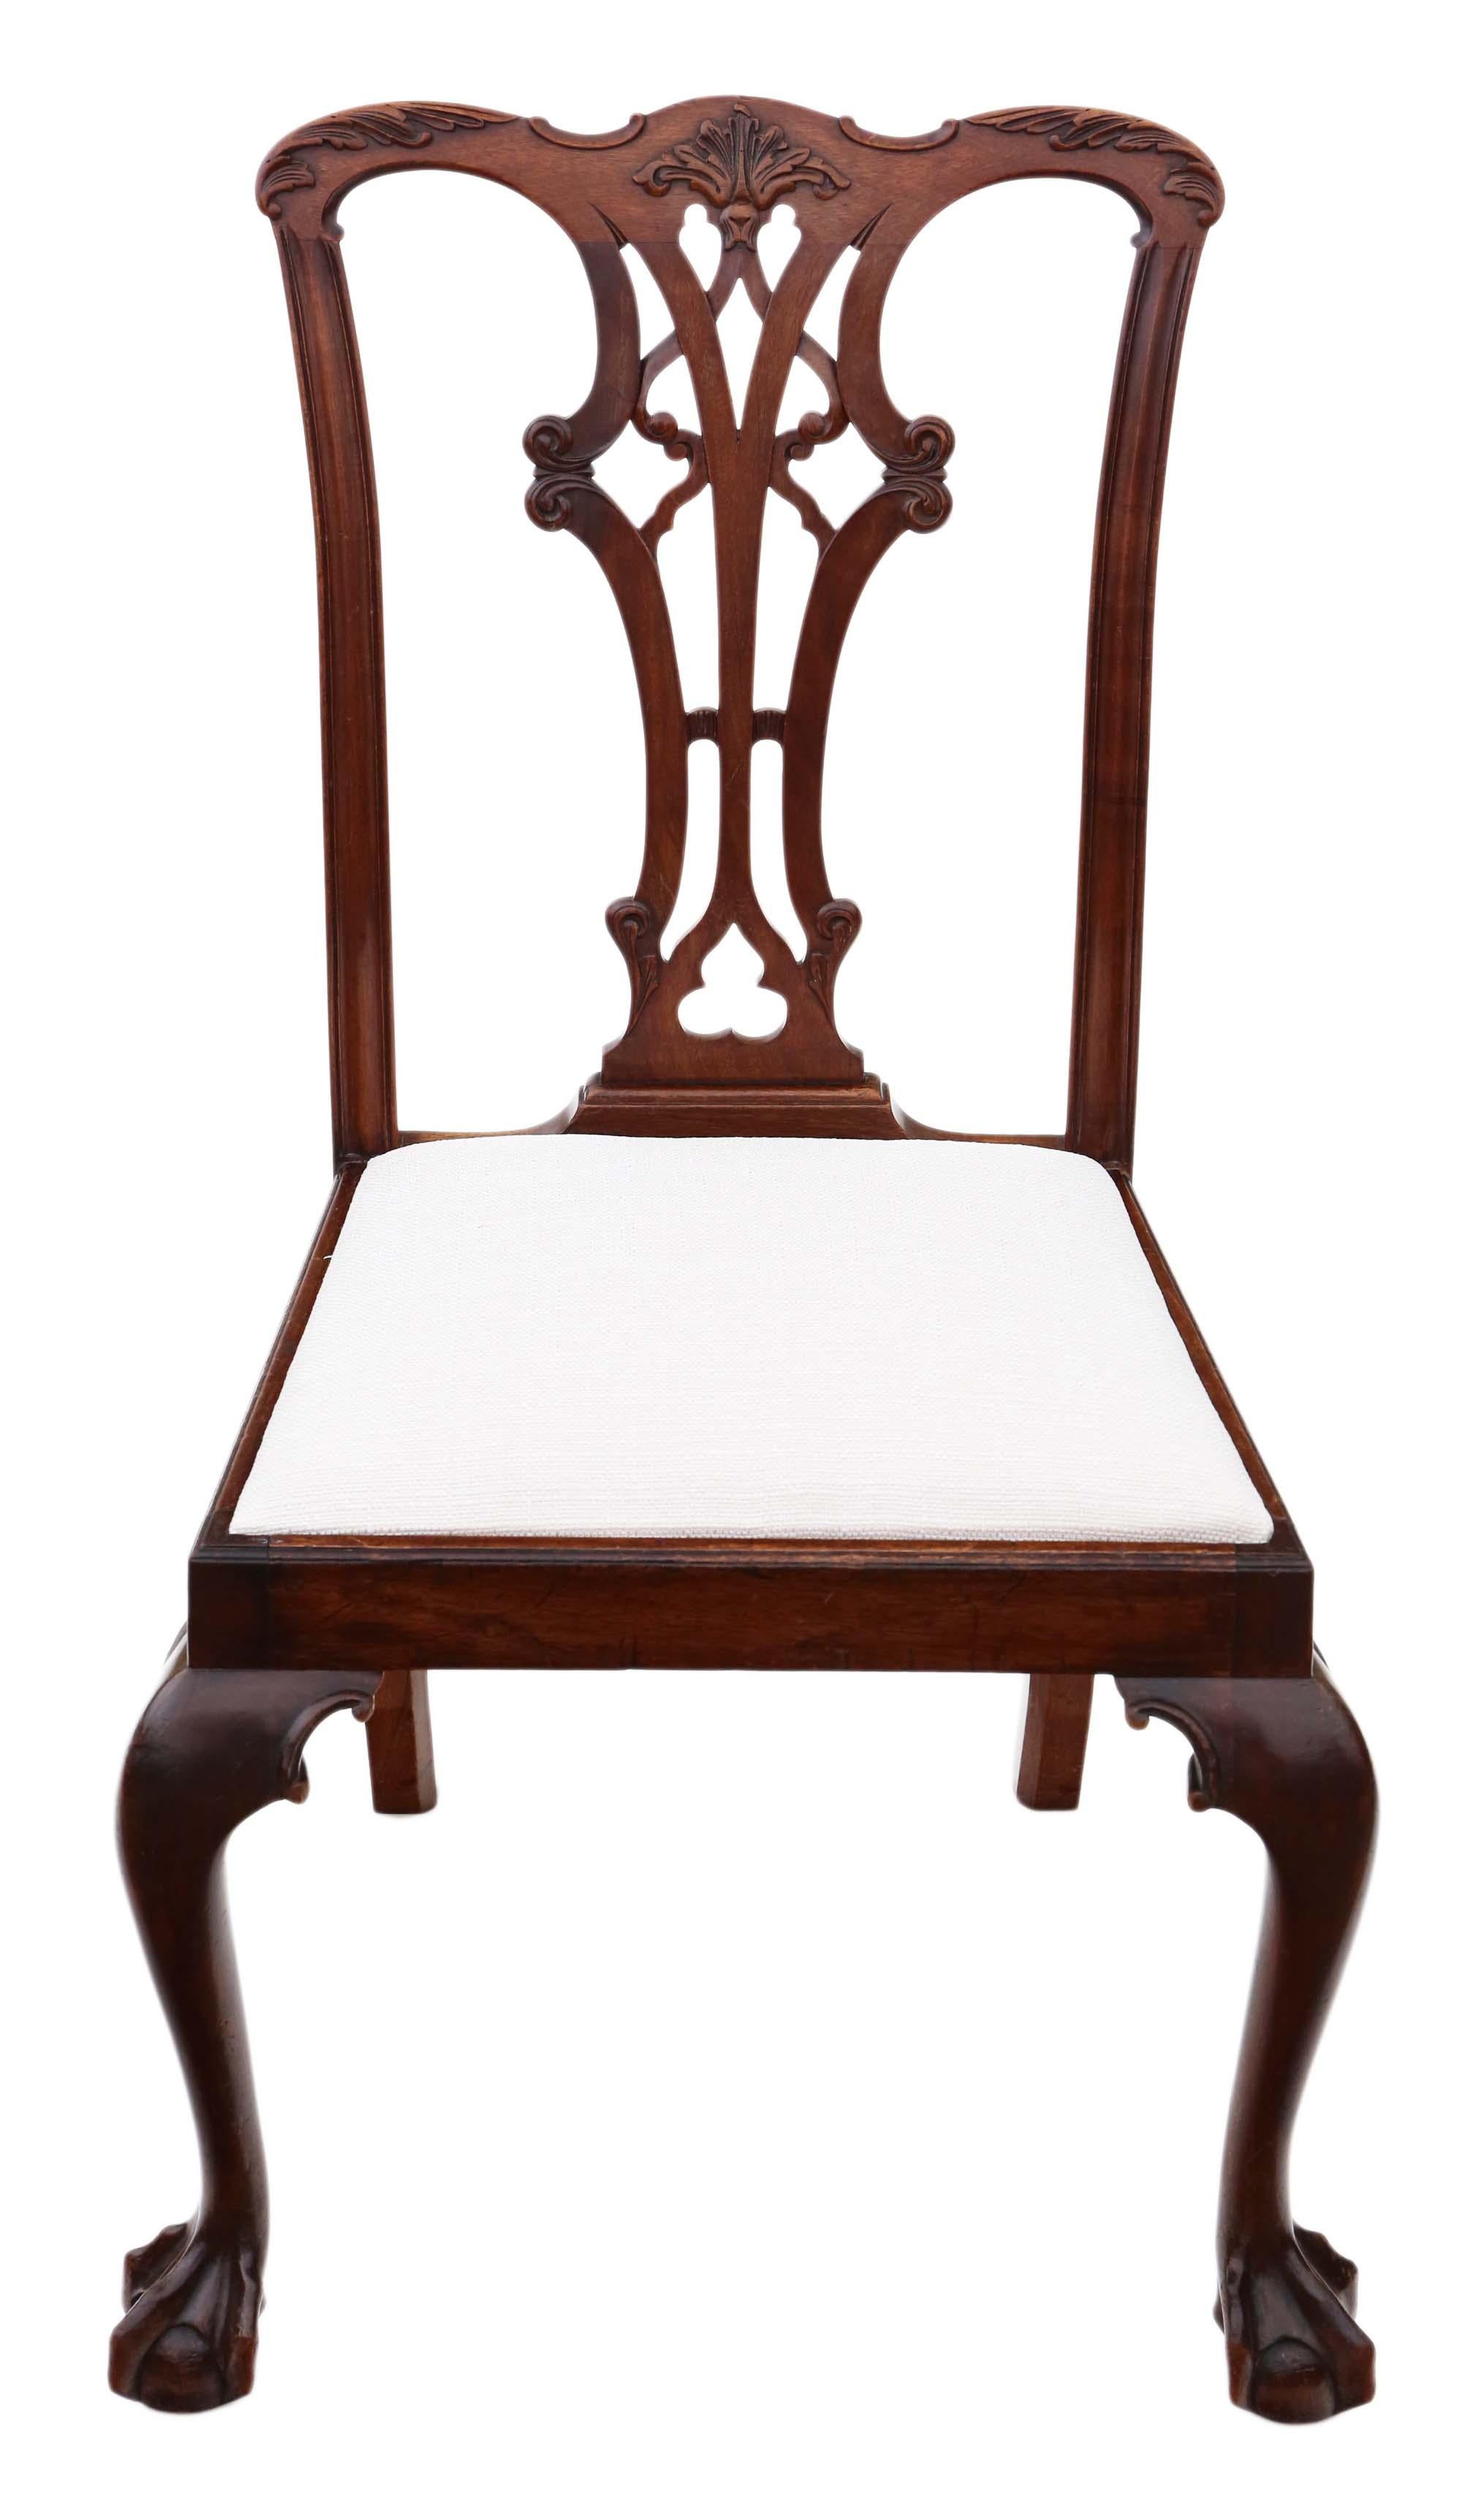 Georgian Revival Mahogany Dining Chairs: Set of 8 (6+2), Antique Quality, C1910 For Sale 5